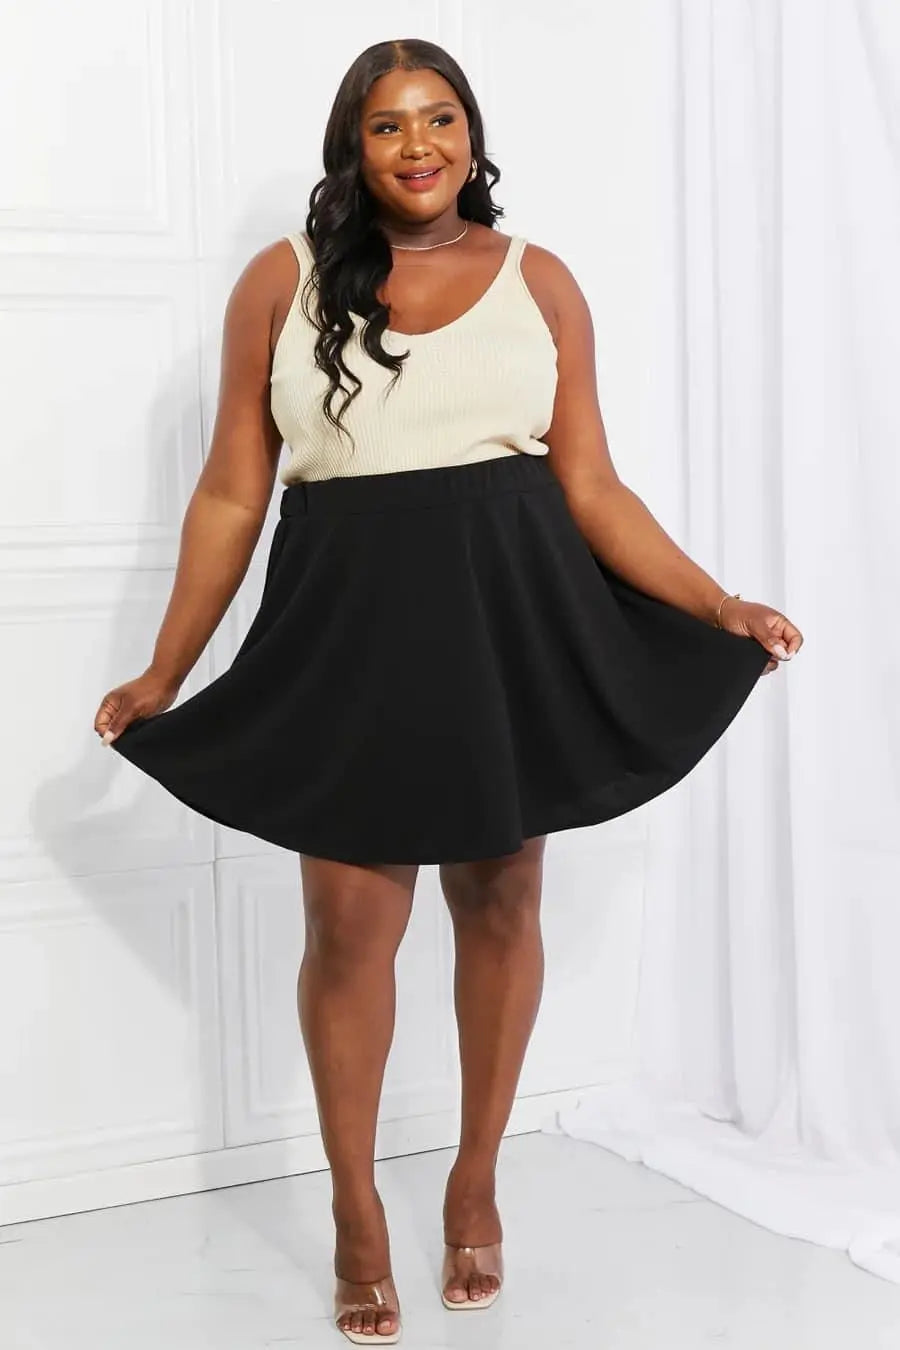 High-Waisted Skirt with Attached Shorts-Styled by Steph-Styled by Steph-Women's Fashion Clothing Boutique, Indiana